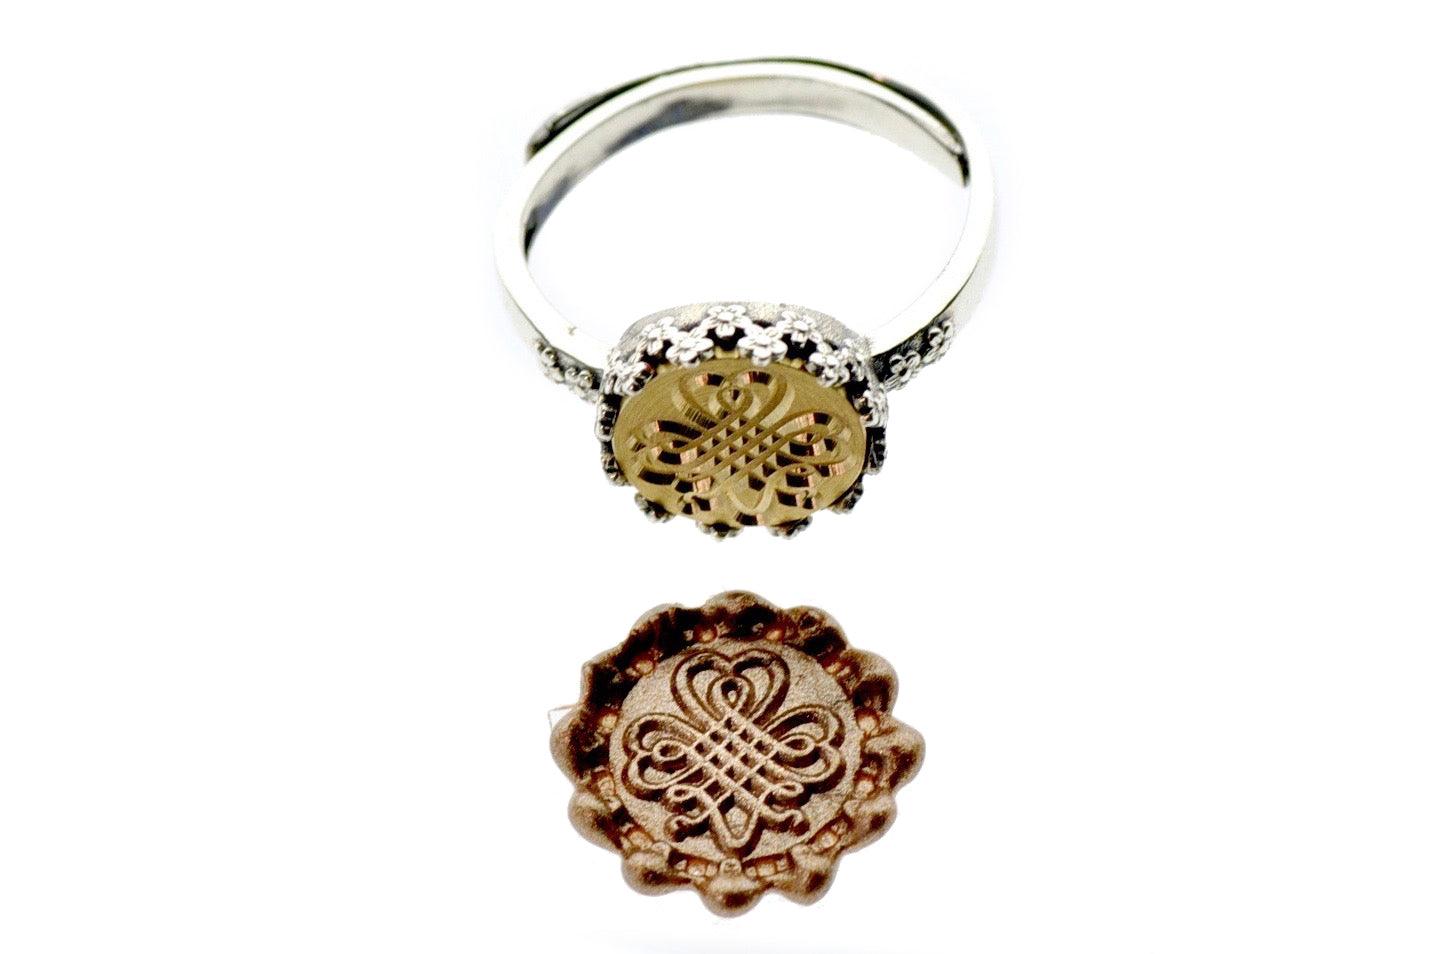 Shamrock Signet Ring - Backtozero B20 - 10fc, 10mm, 10mm ring, accessory, Champagne Gold, Clover, floral, Flower, her, jewelry, luck, Lucky, ring, seal, seal ring, signet ring, size 6, size 7, size 8, wax seal, wax seal ring, wax seal stamp, wreath